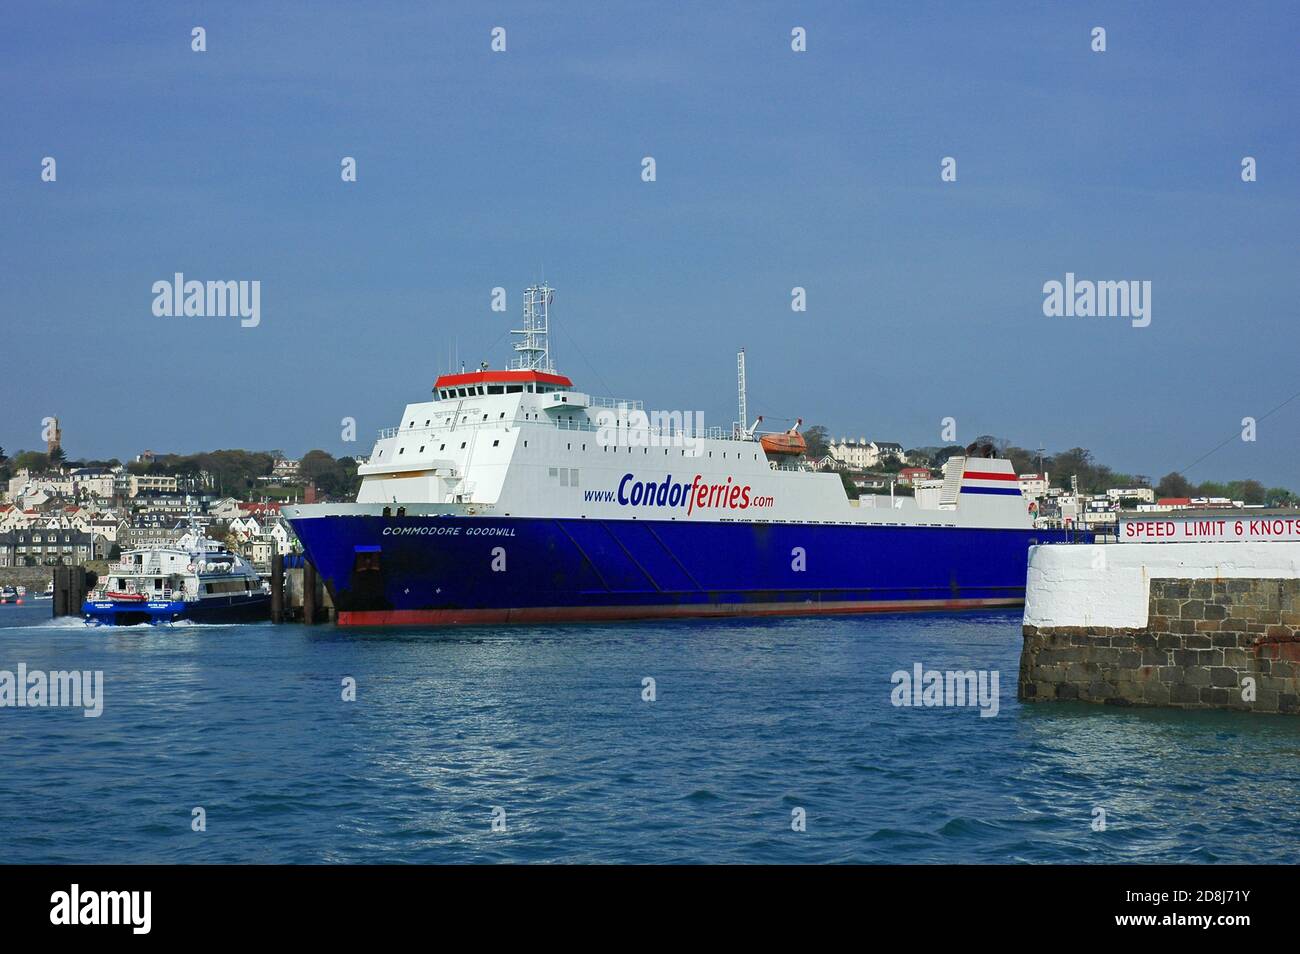 Condorferries ferry moored in St. Peter Port, Guernsey, Channel Islands, April. Stock Photo